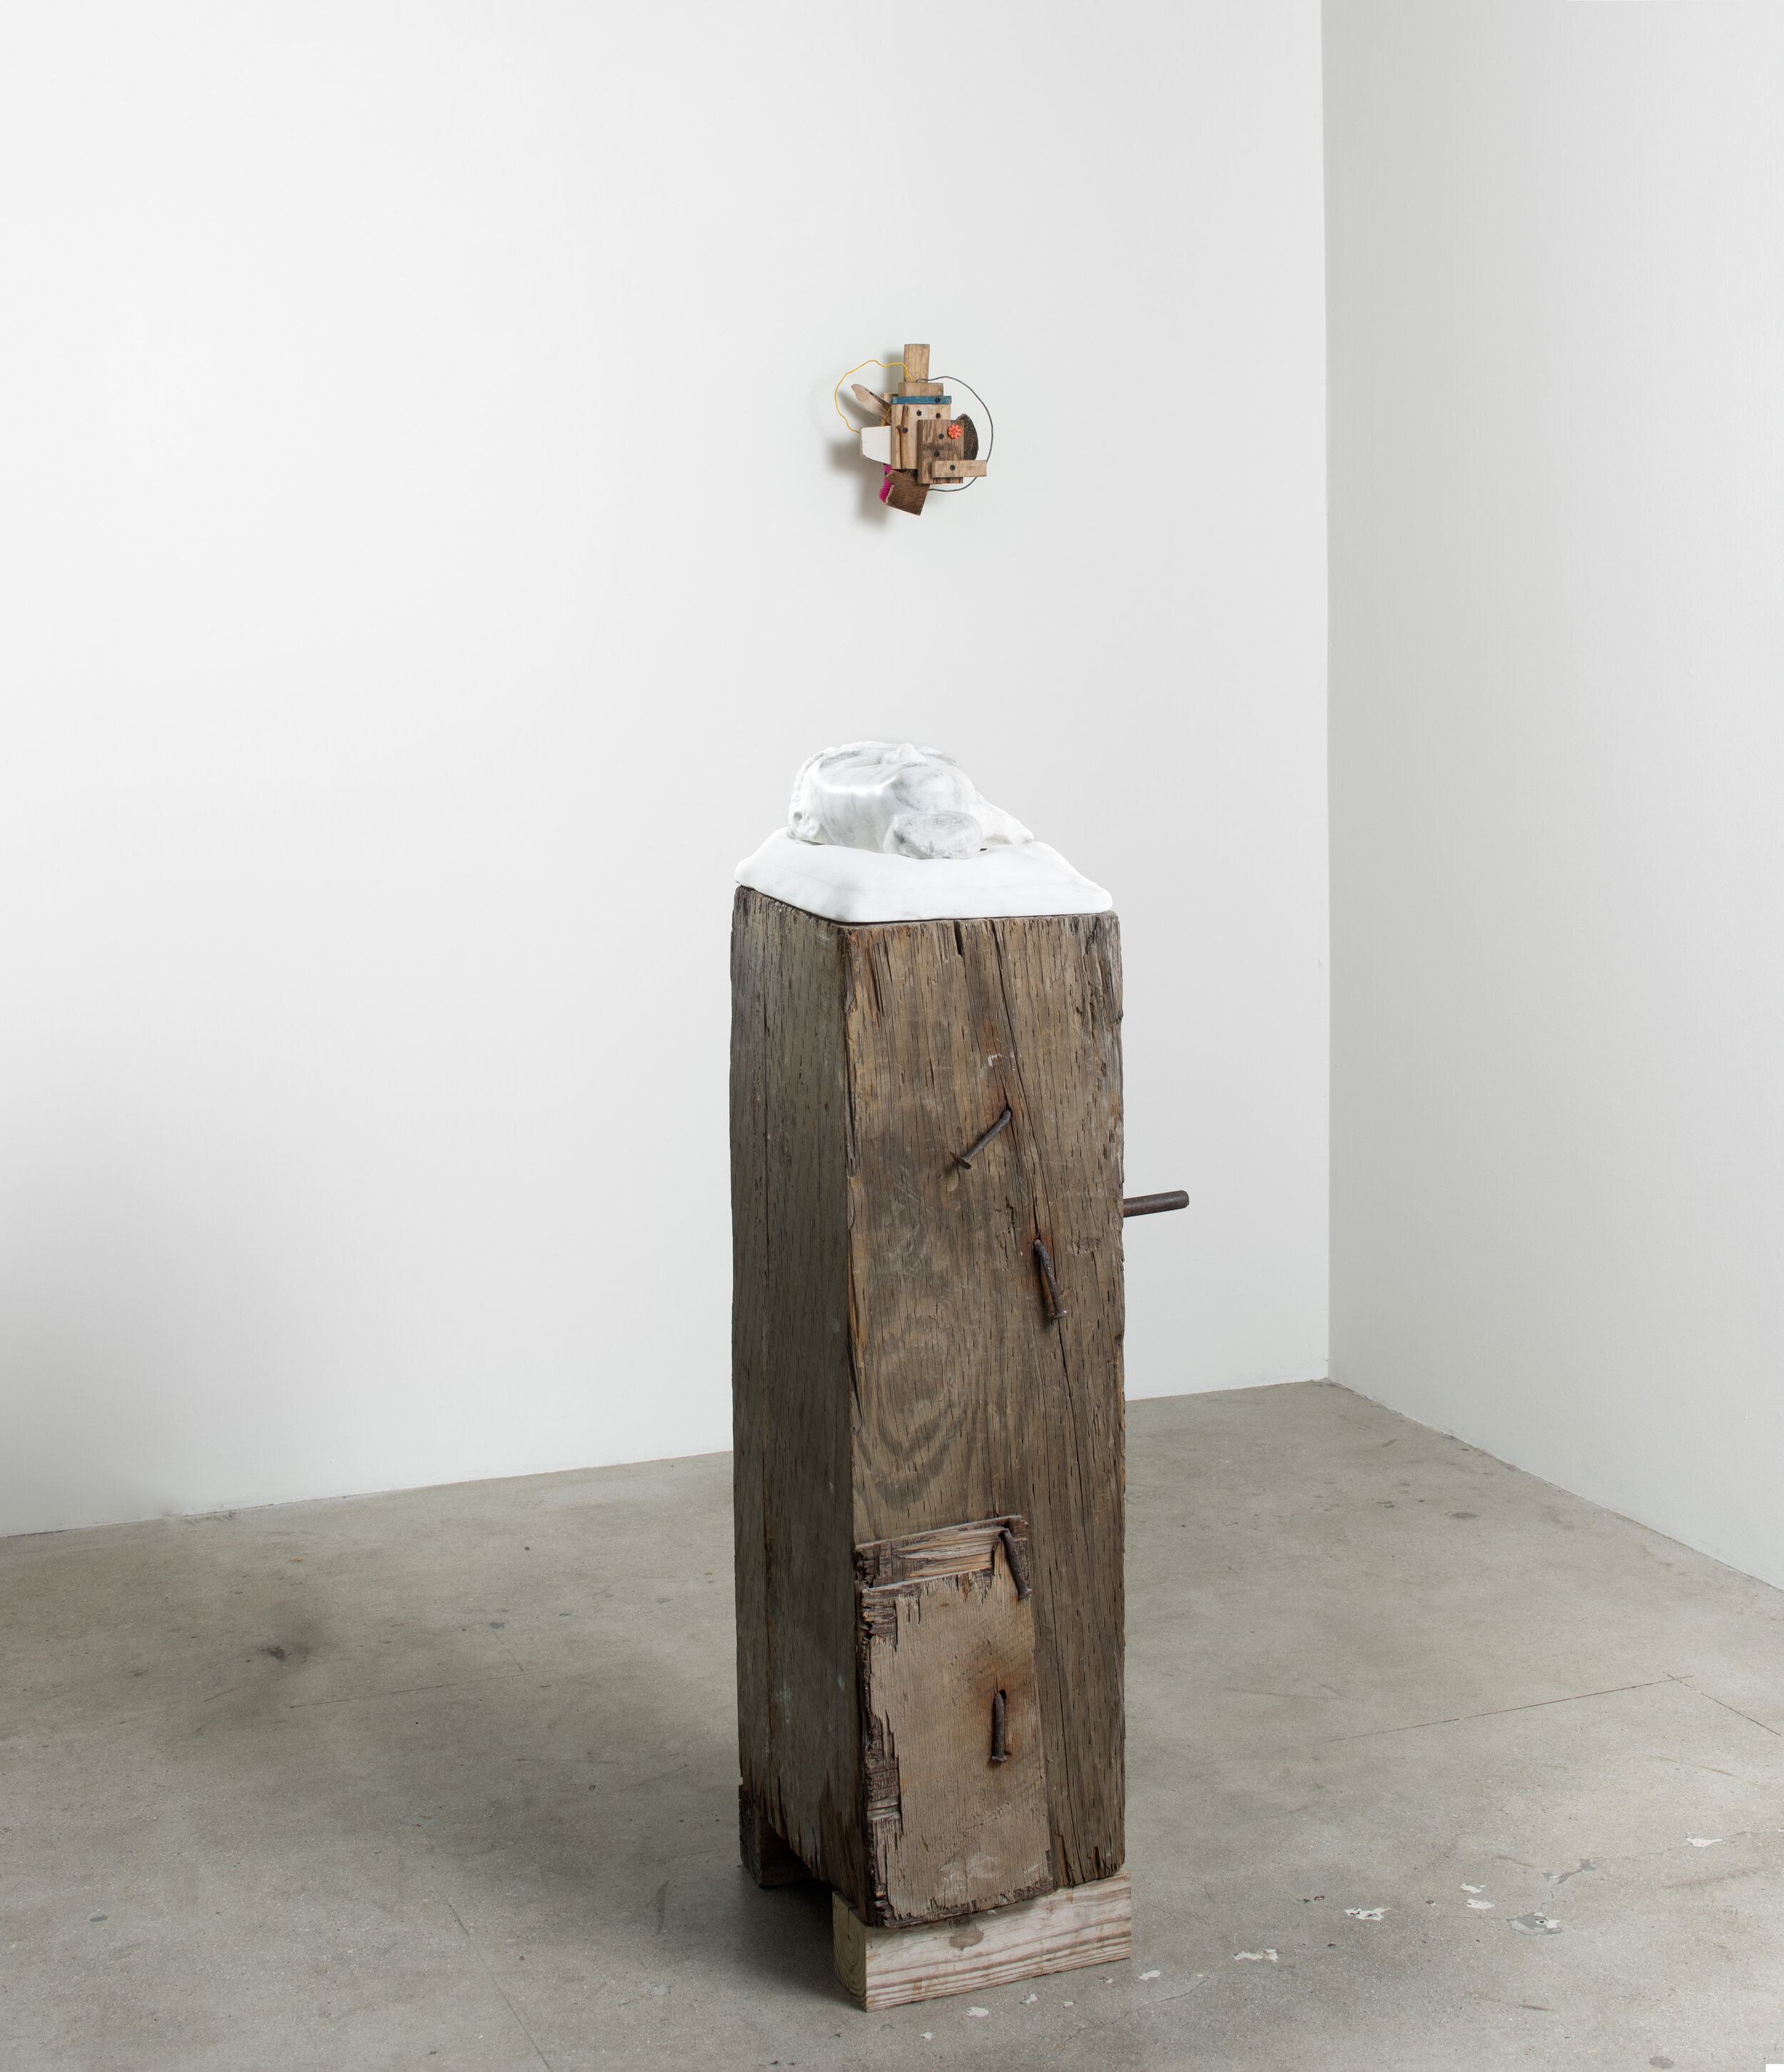  Installation View  Sleepin In , 2019 Found object, marble, and hardware 48 x 16 1/2 x 16 inches 